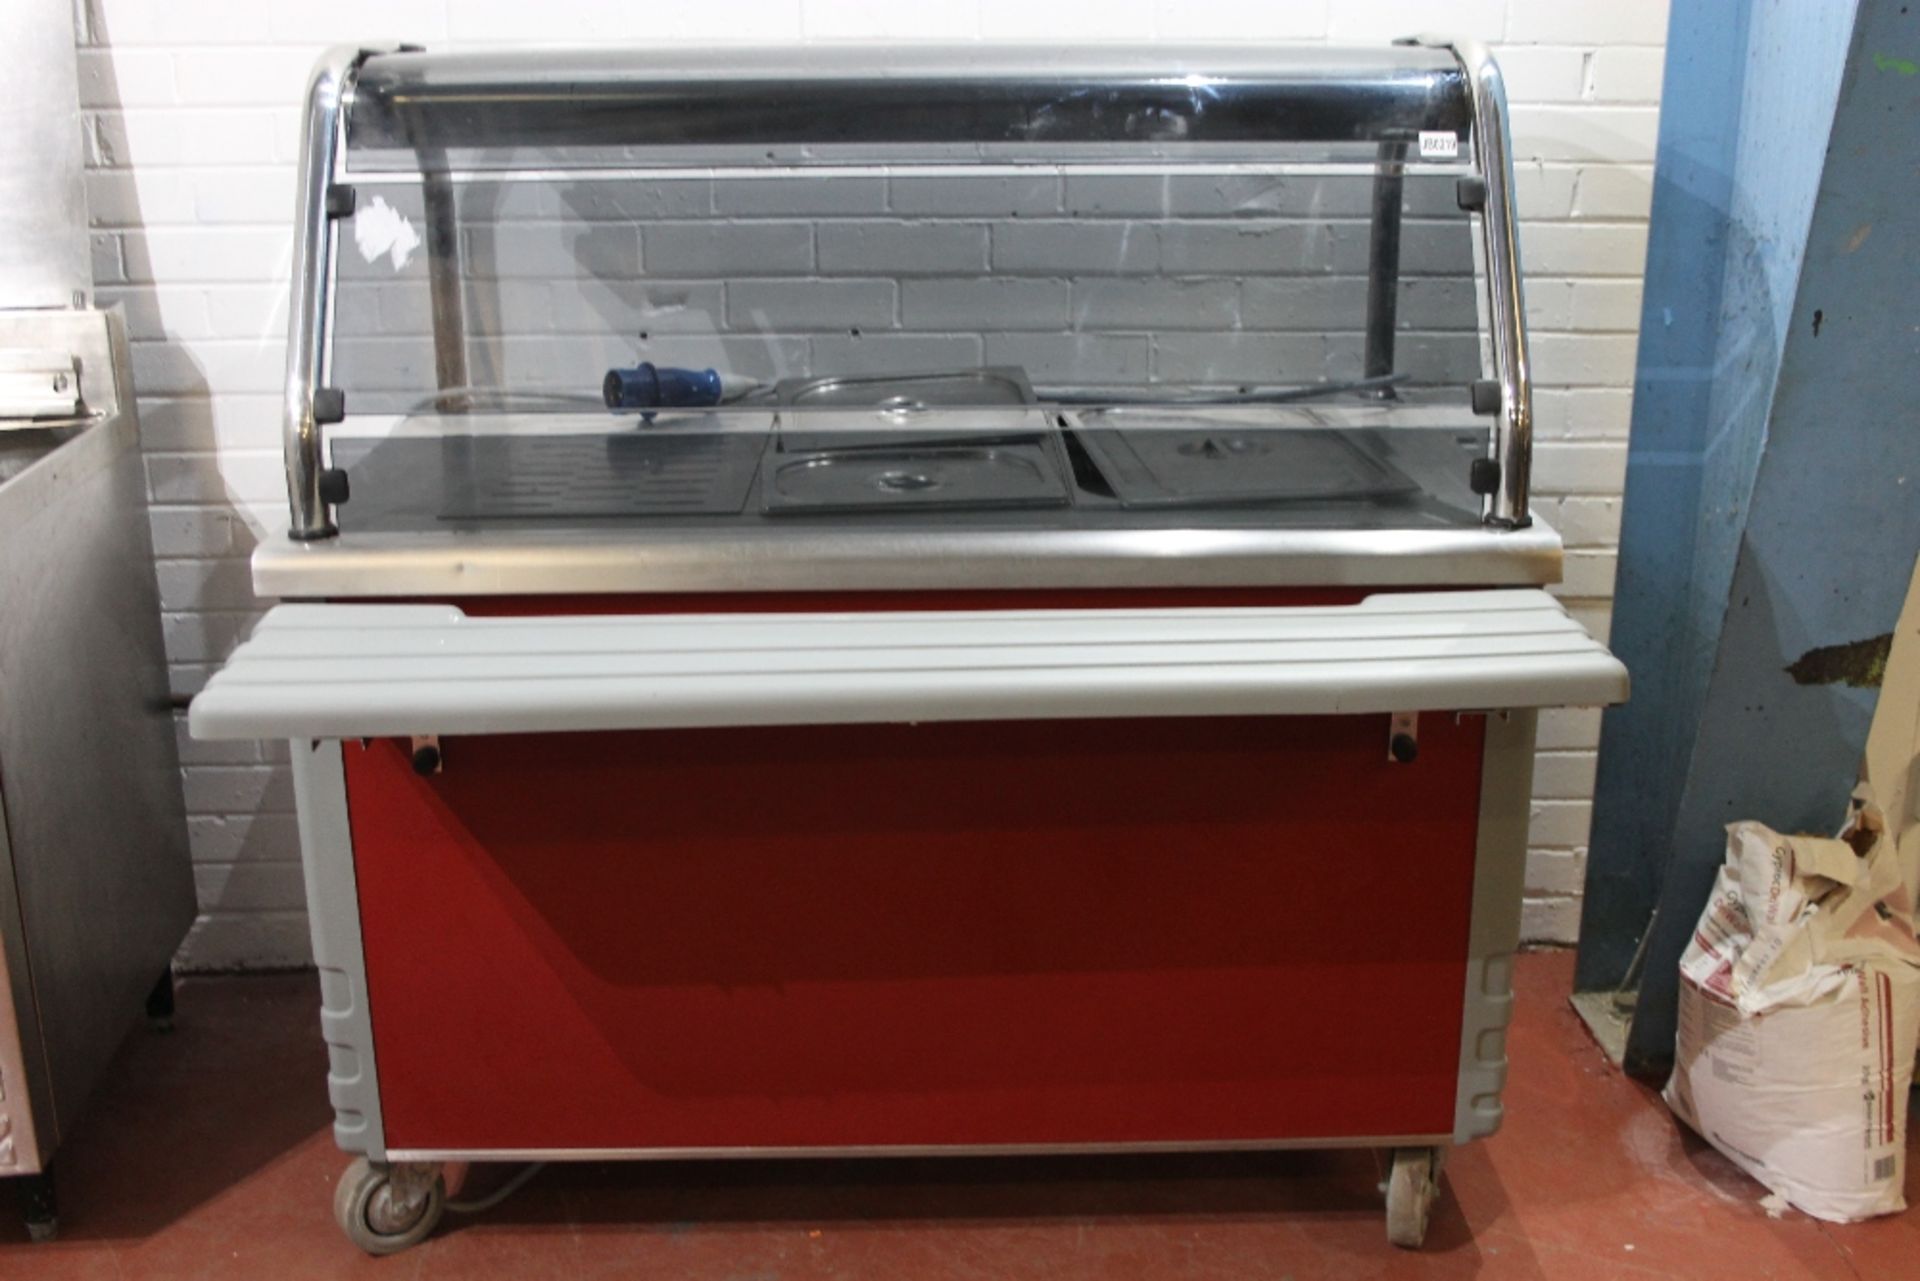 Grundy Mobile Bain Marie / Hot Food Servery with Gastro Pans – Model 91303 R11 – 3ph- Tested